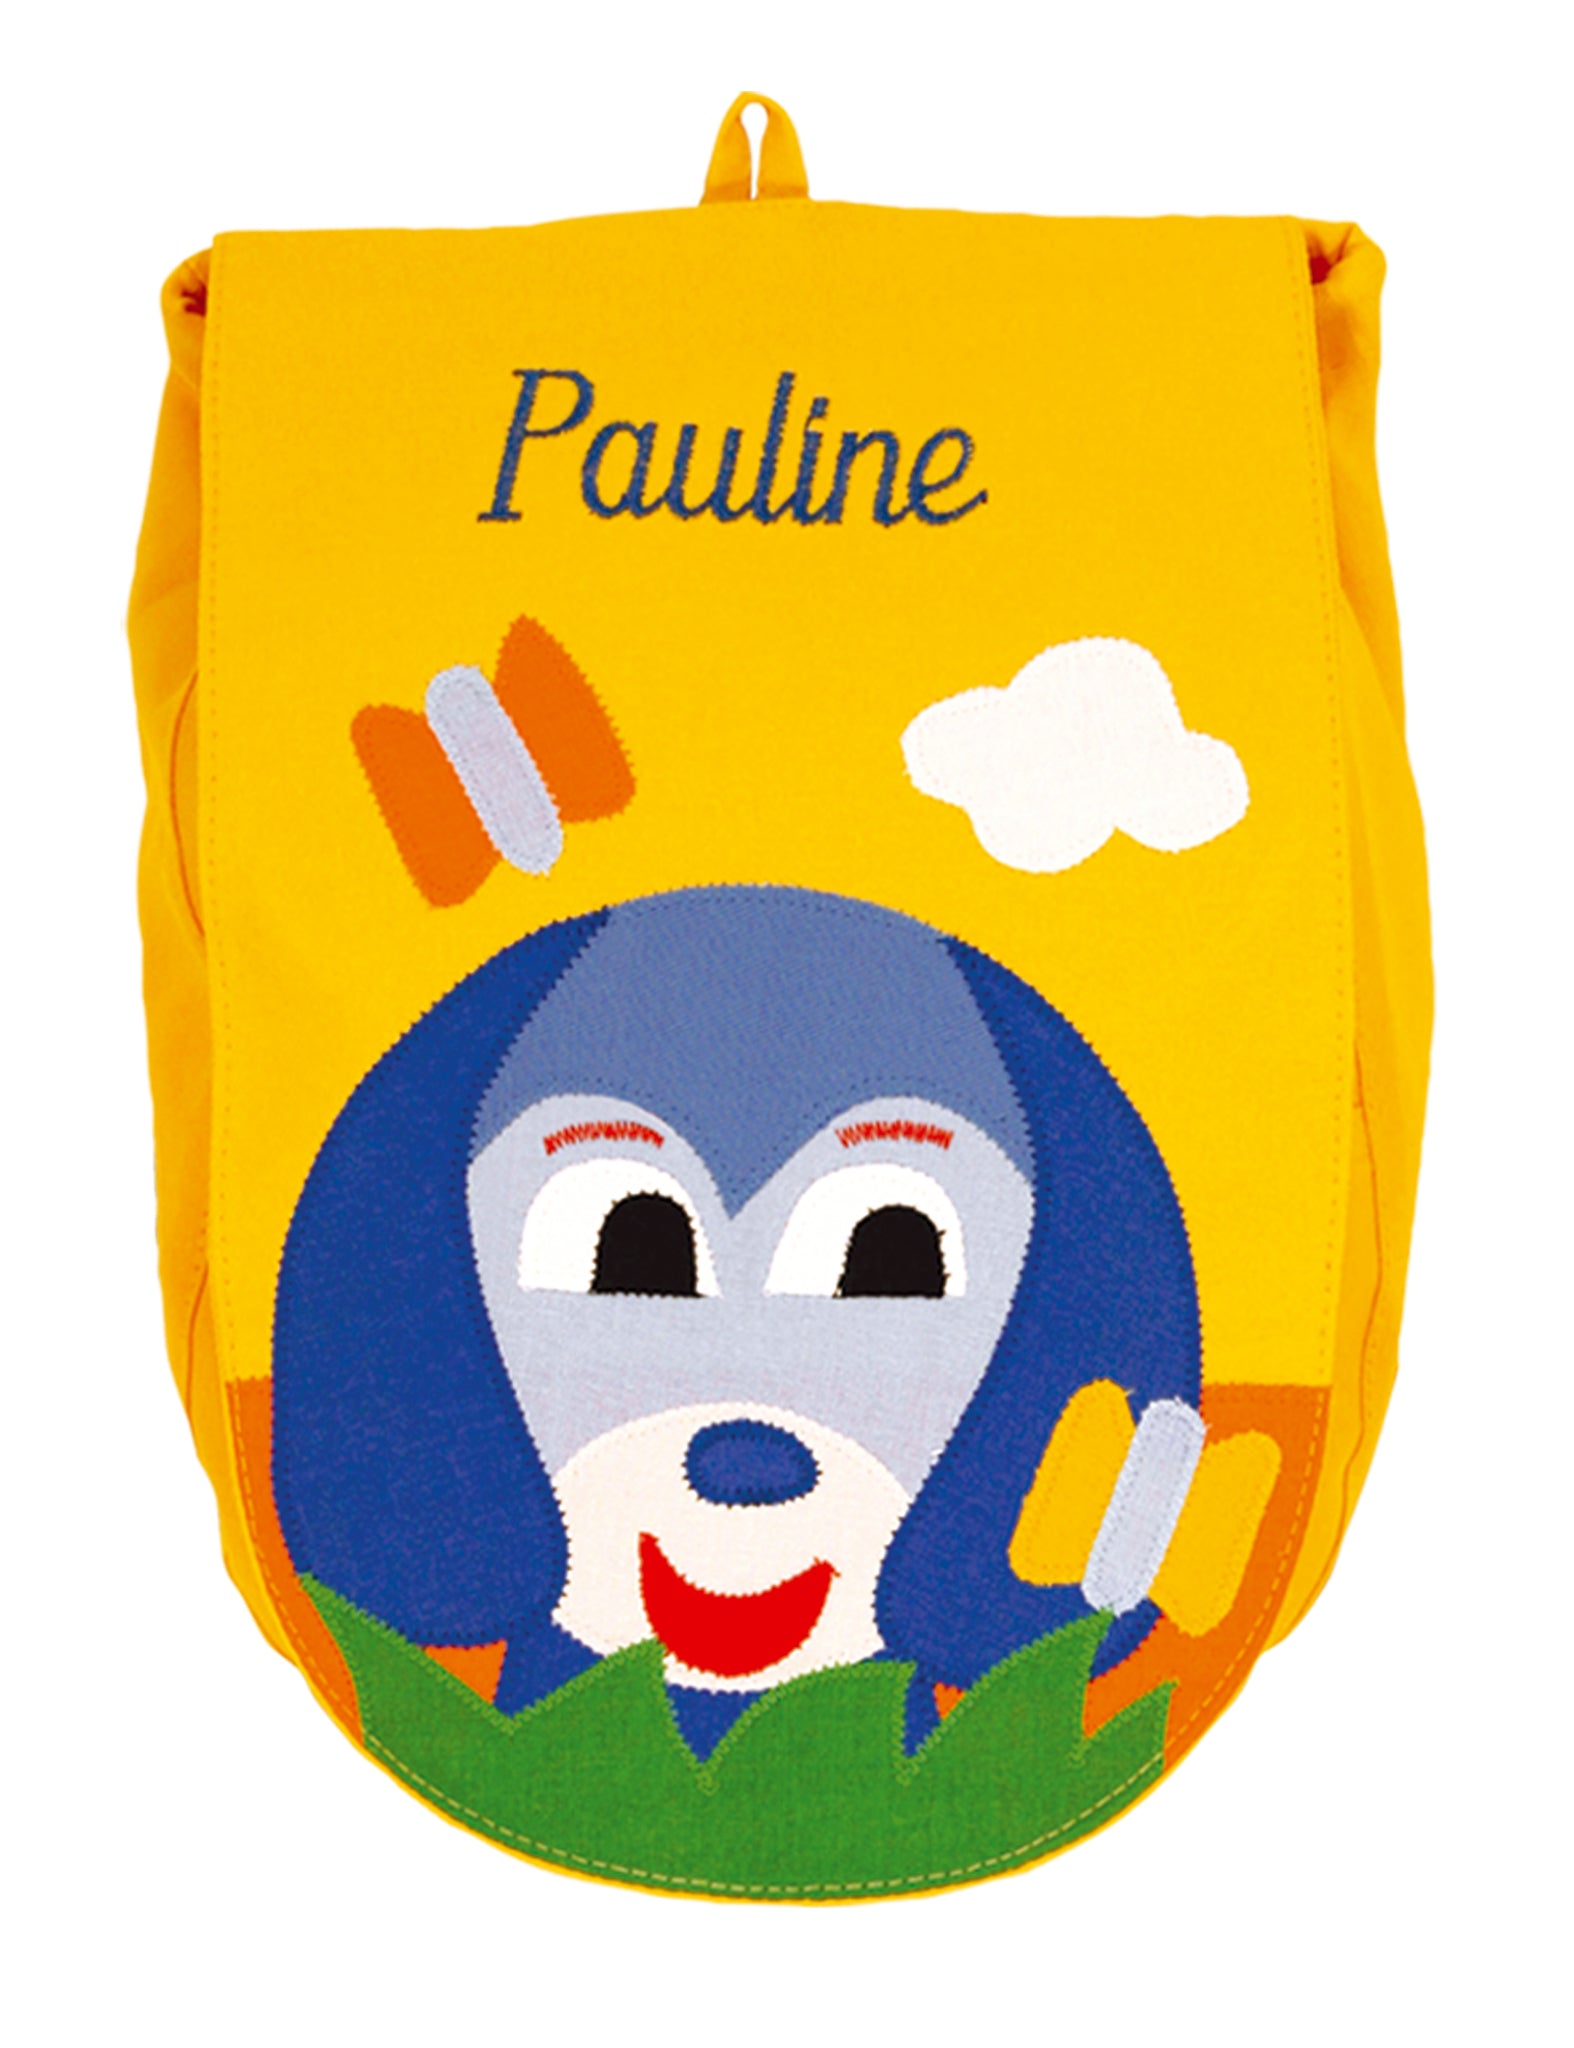 Personalized children's backpack - The Yellow Dog